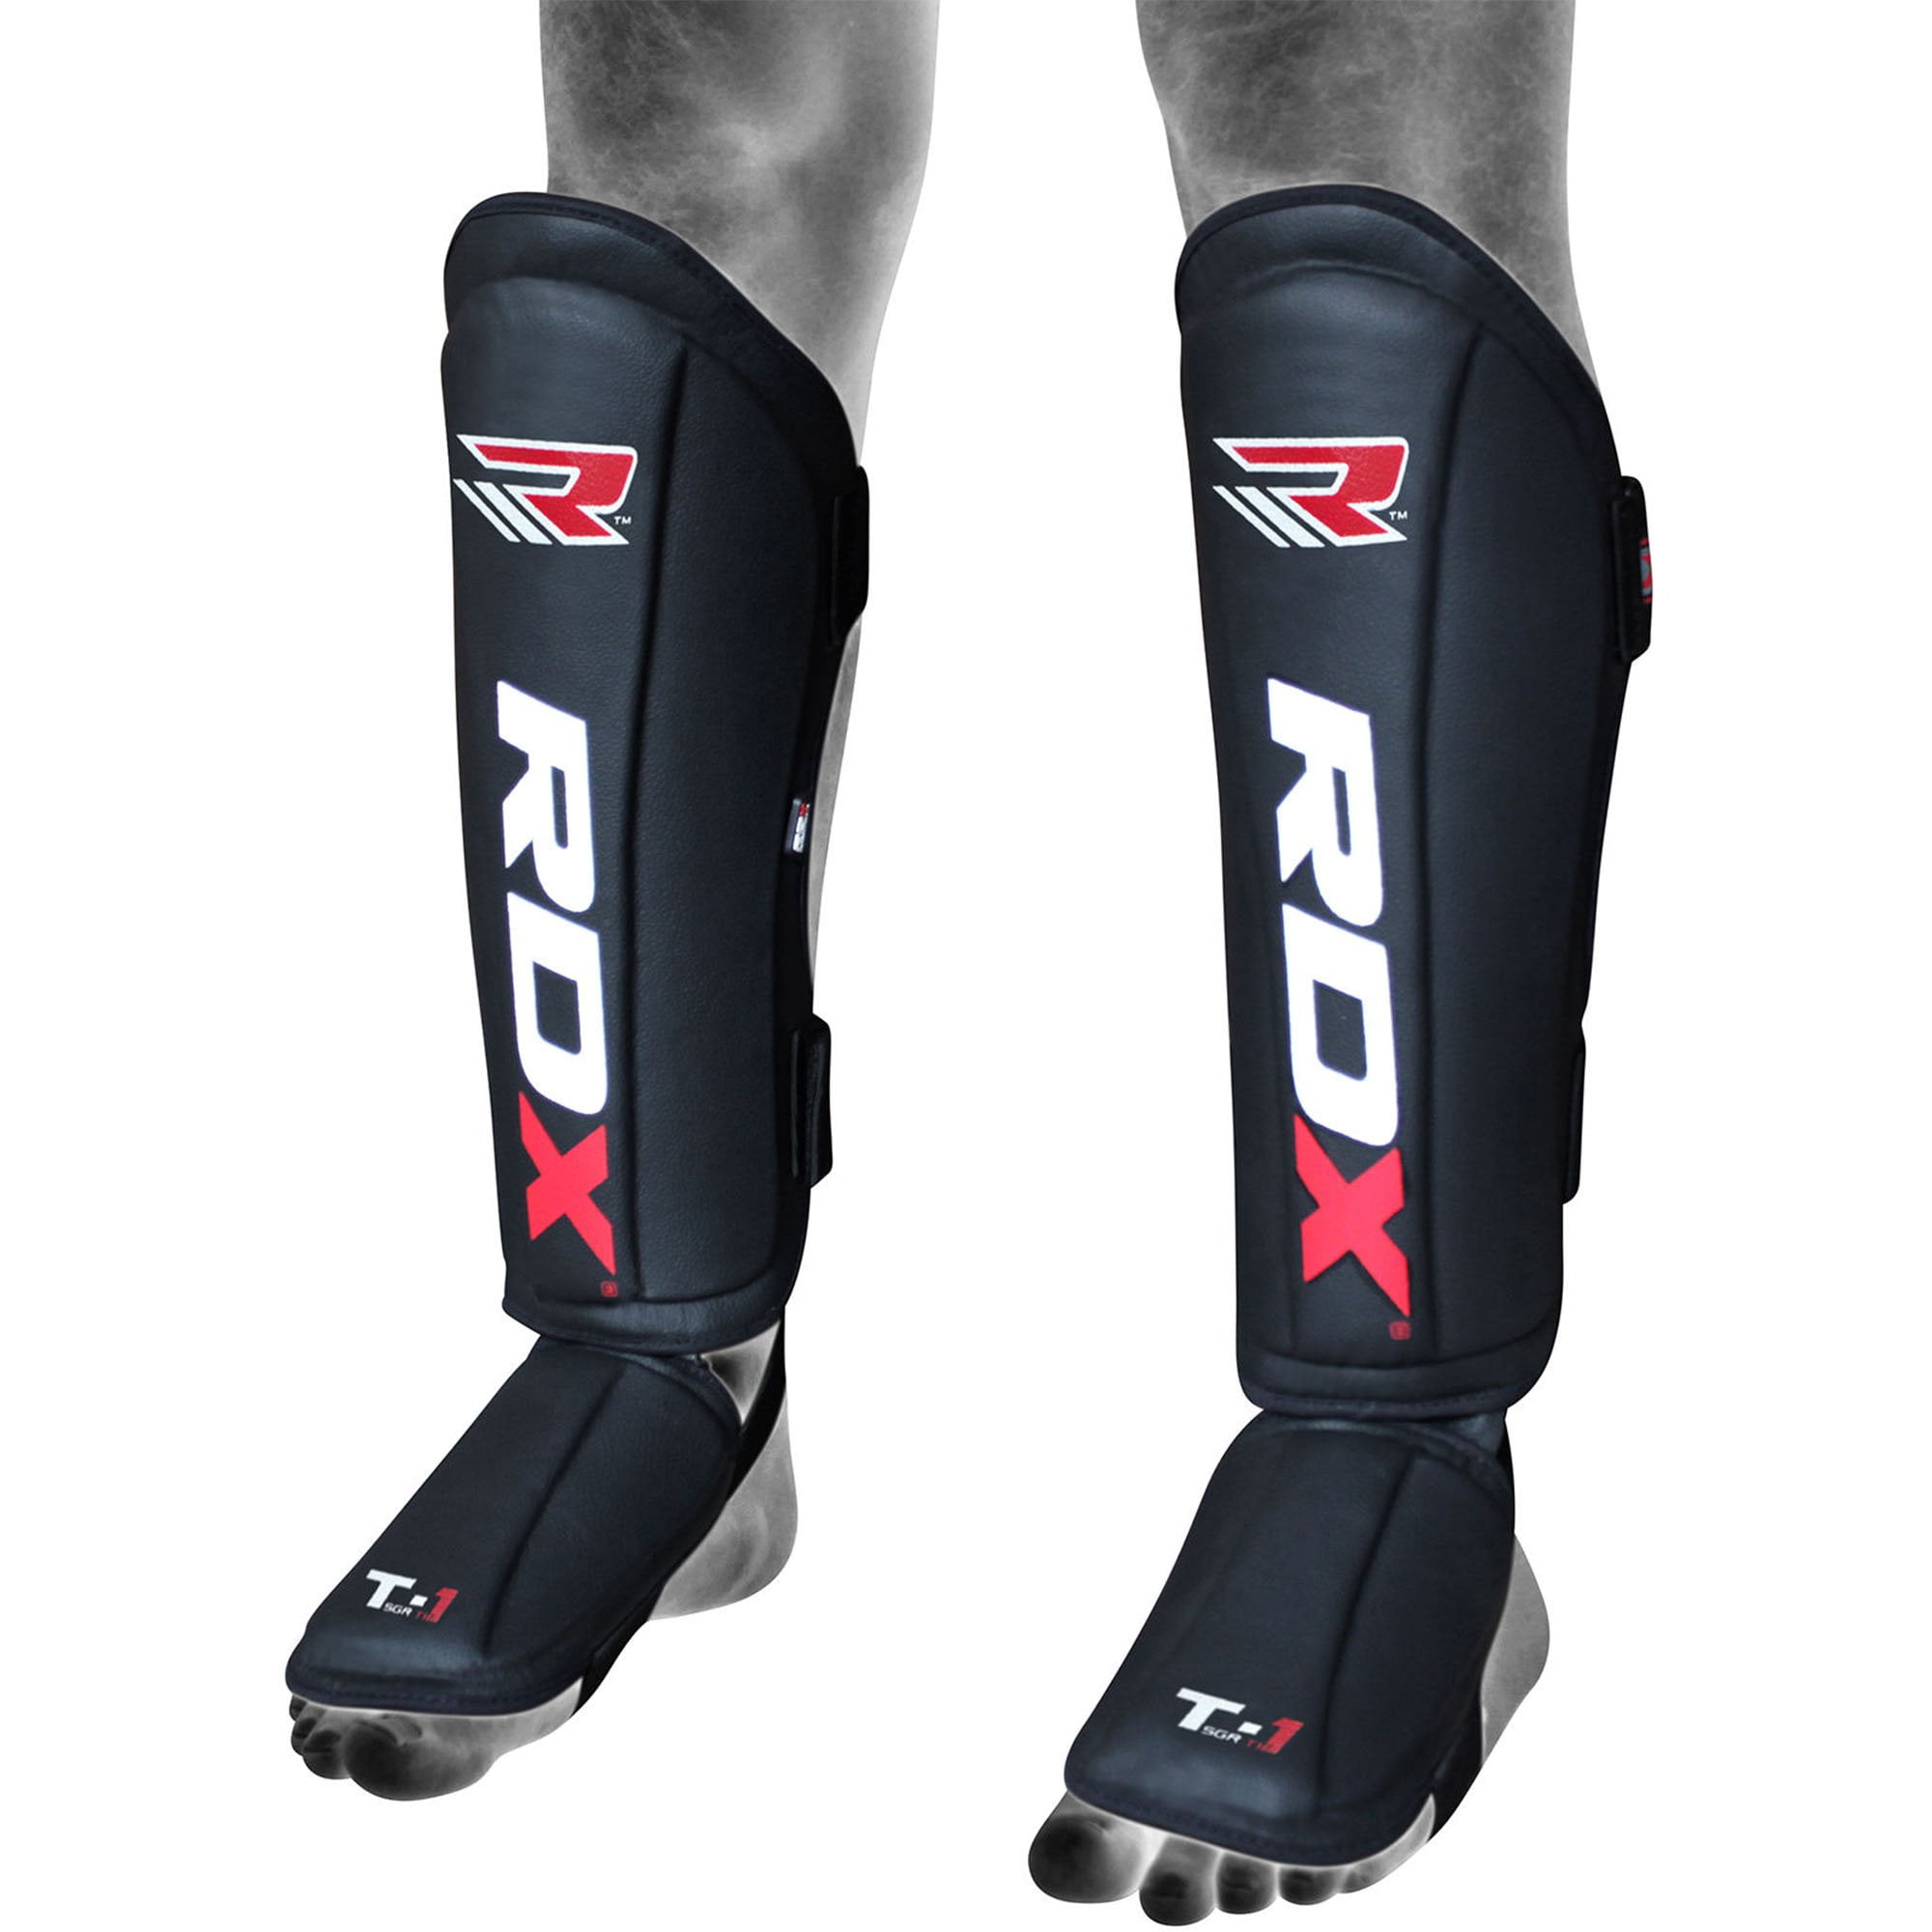 MSA SHIN GUARD with INSTEP LARGE New 